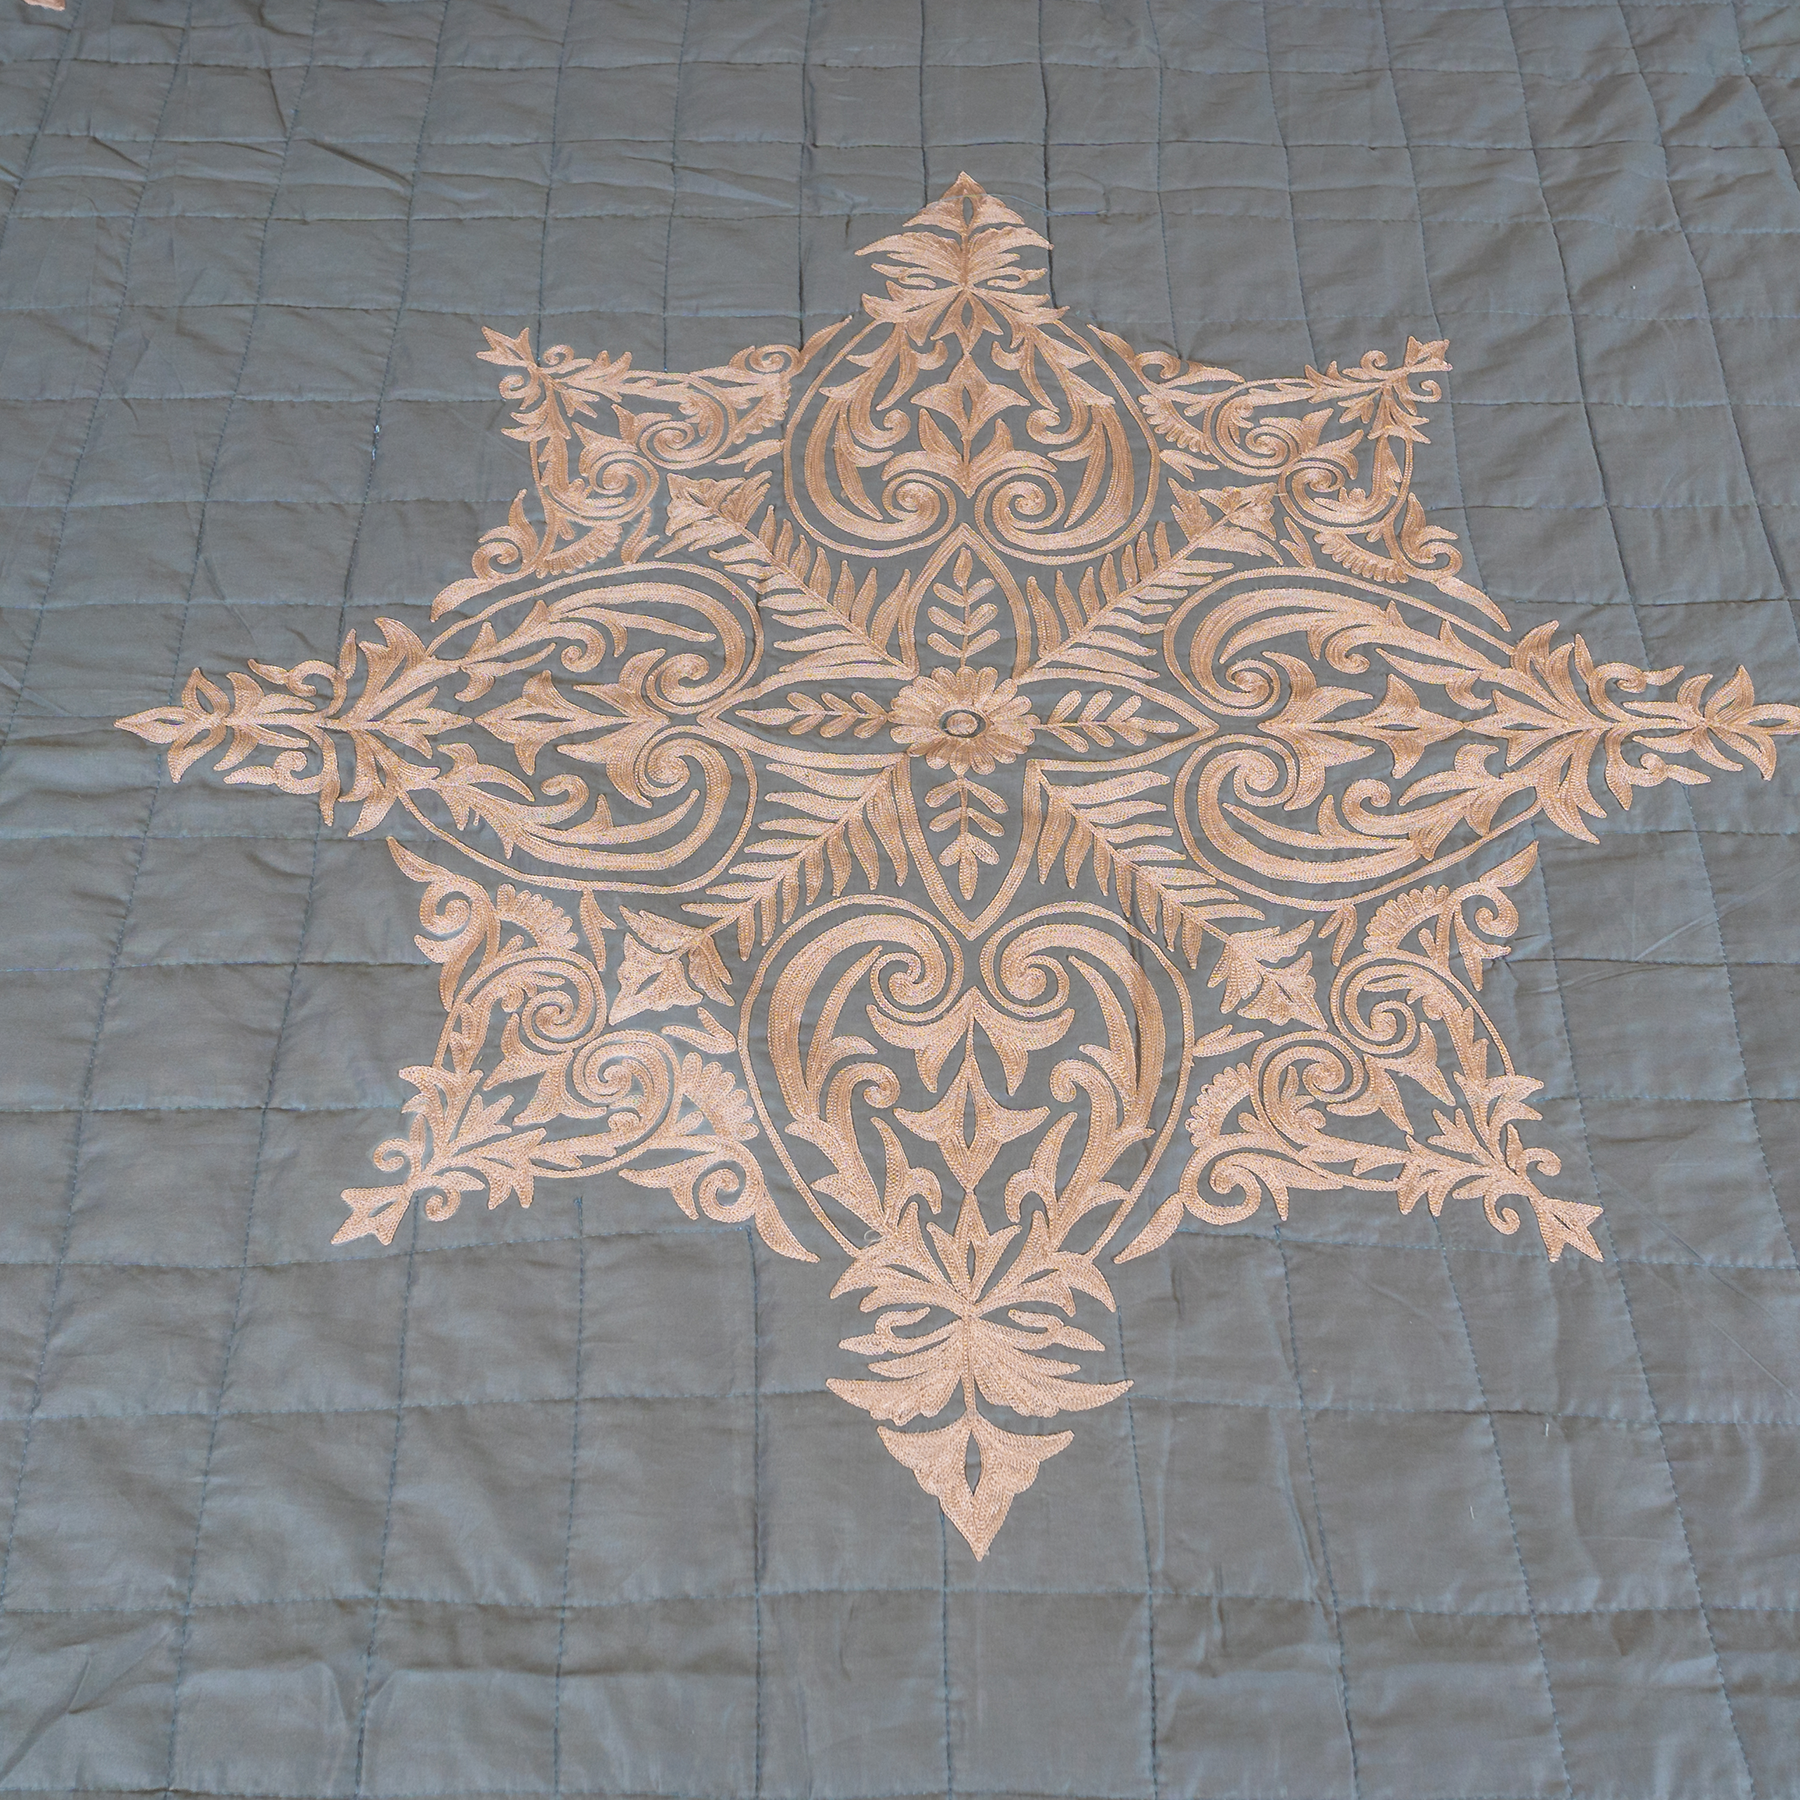 The LuxeLife Grey Cotton Embroidered Bedcover